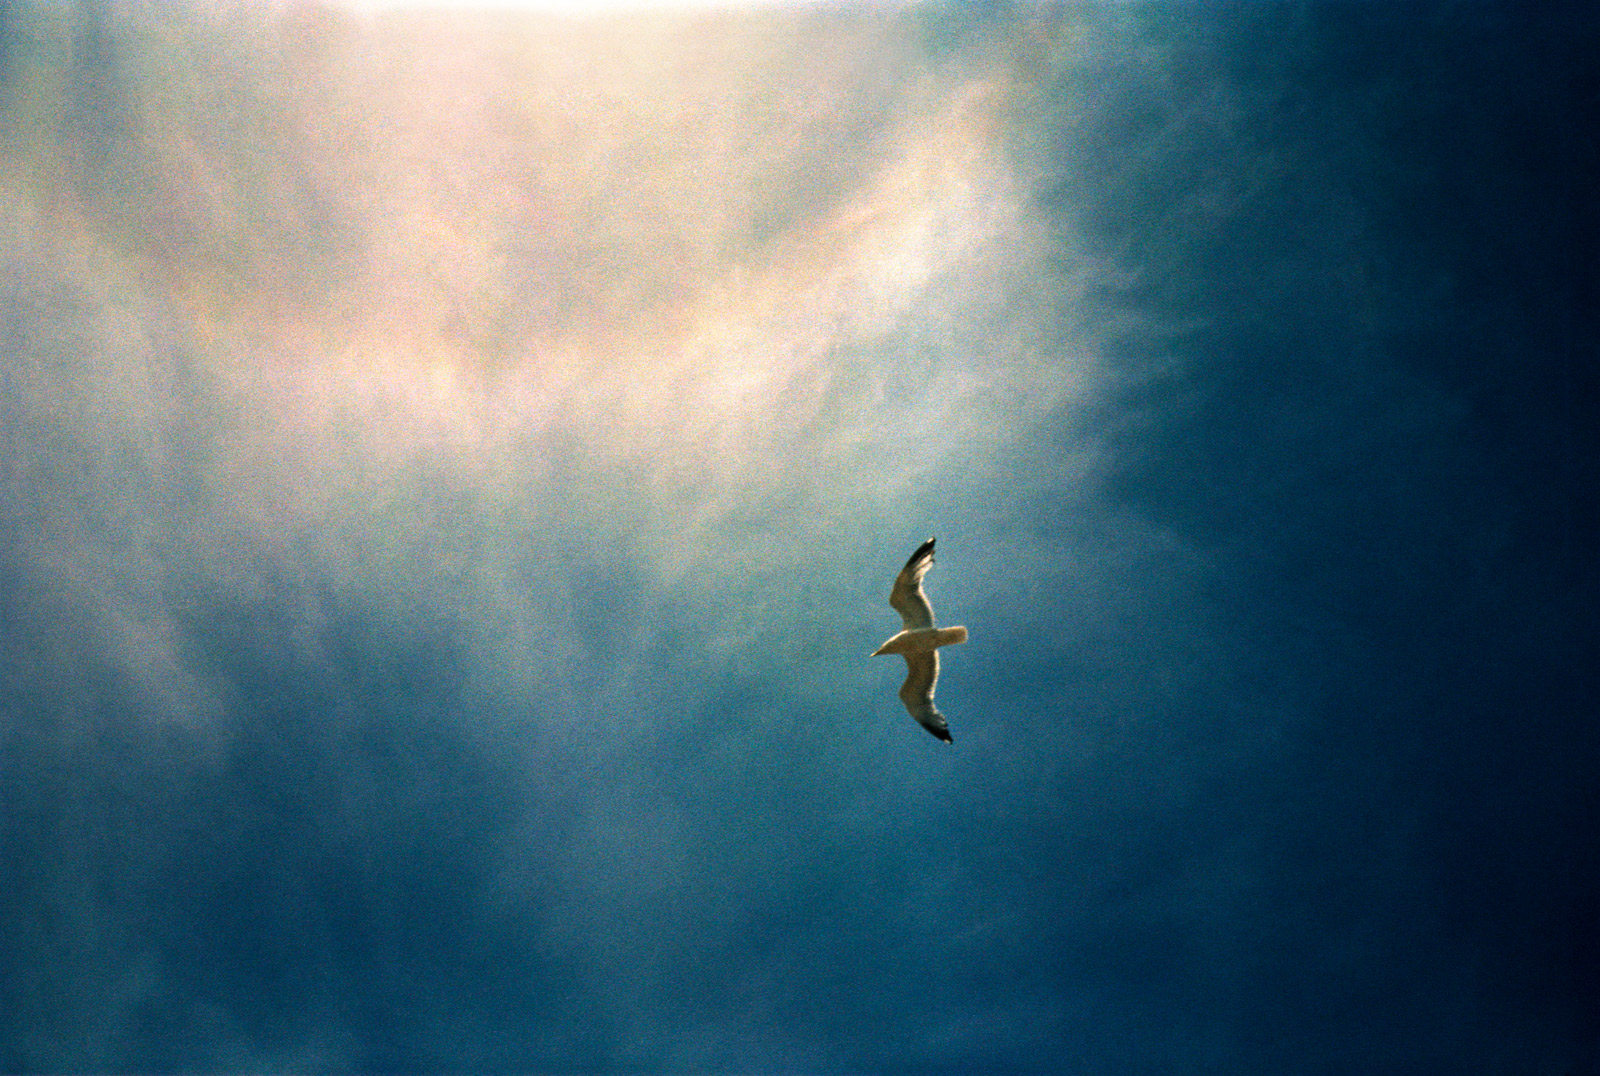 Seagull flying near to the sun, analogue photography.